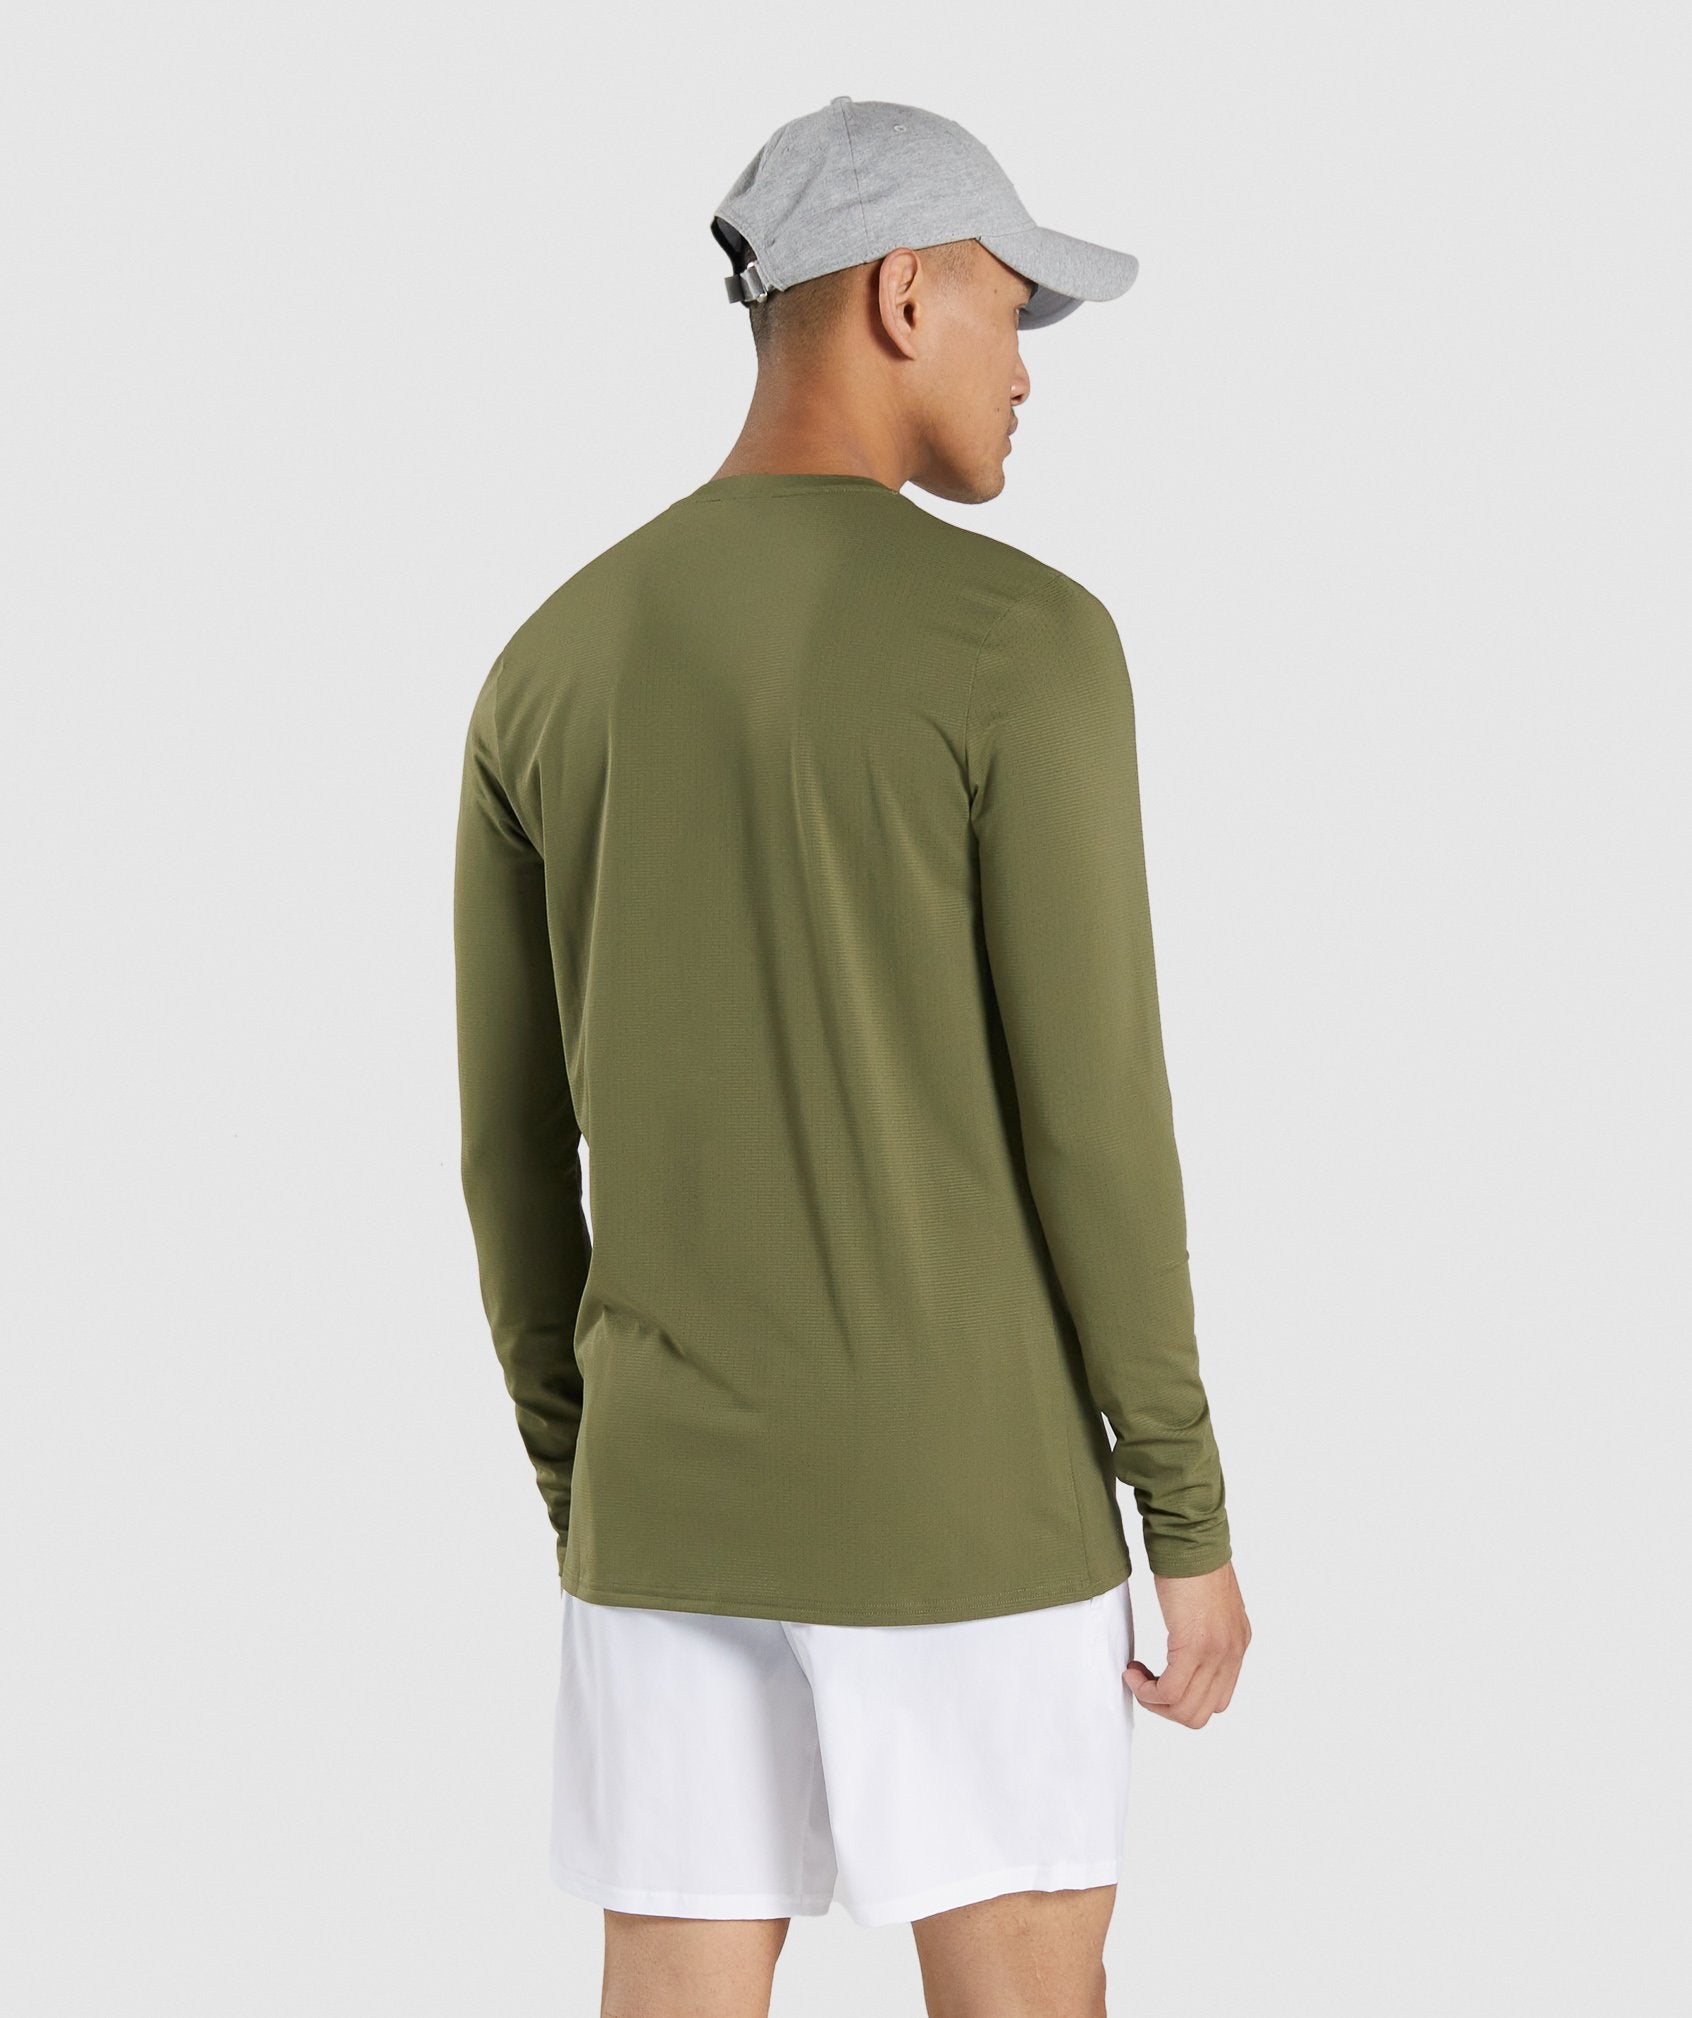 Arrival Long Sleeve T-Shirt in Dark Green - view 3